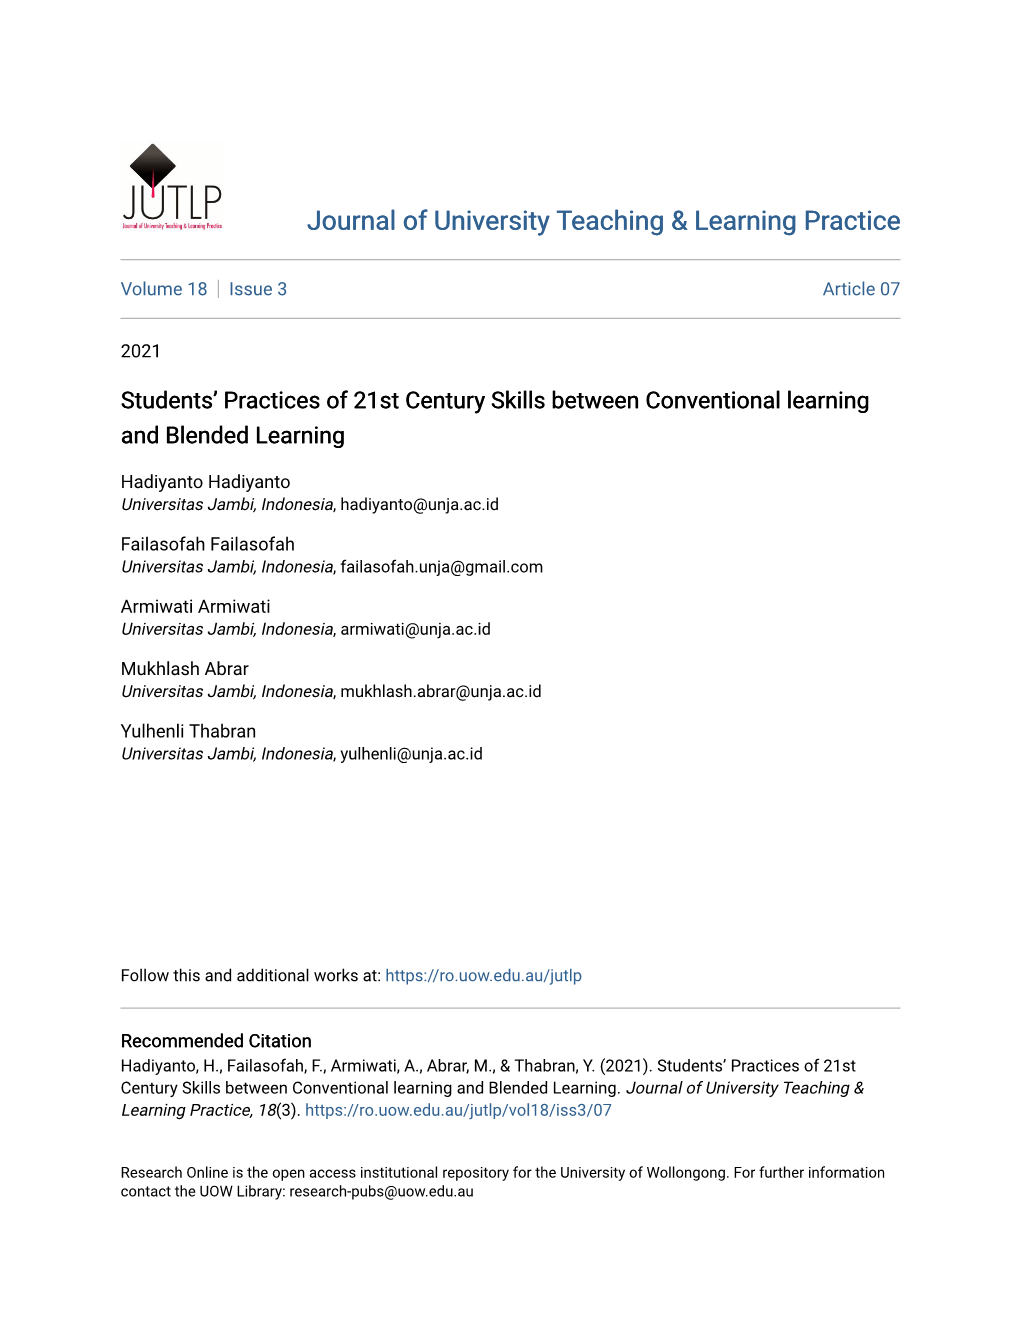 Students' Practices of 21St Century Skills Between Conventional Learning and Blended Learning